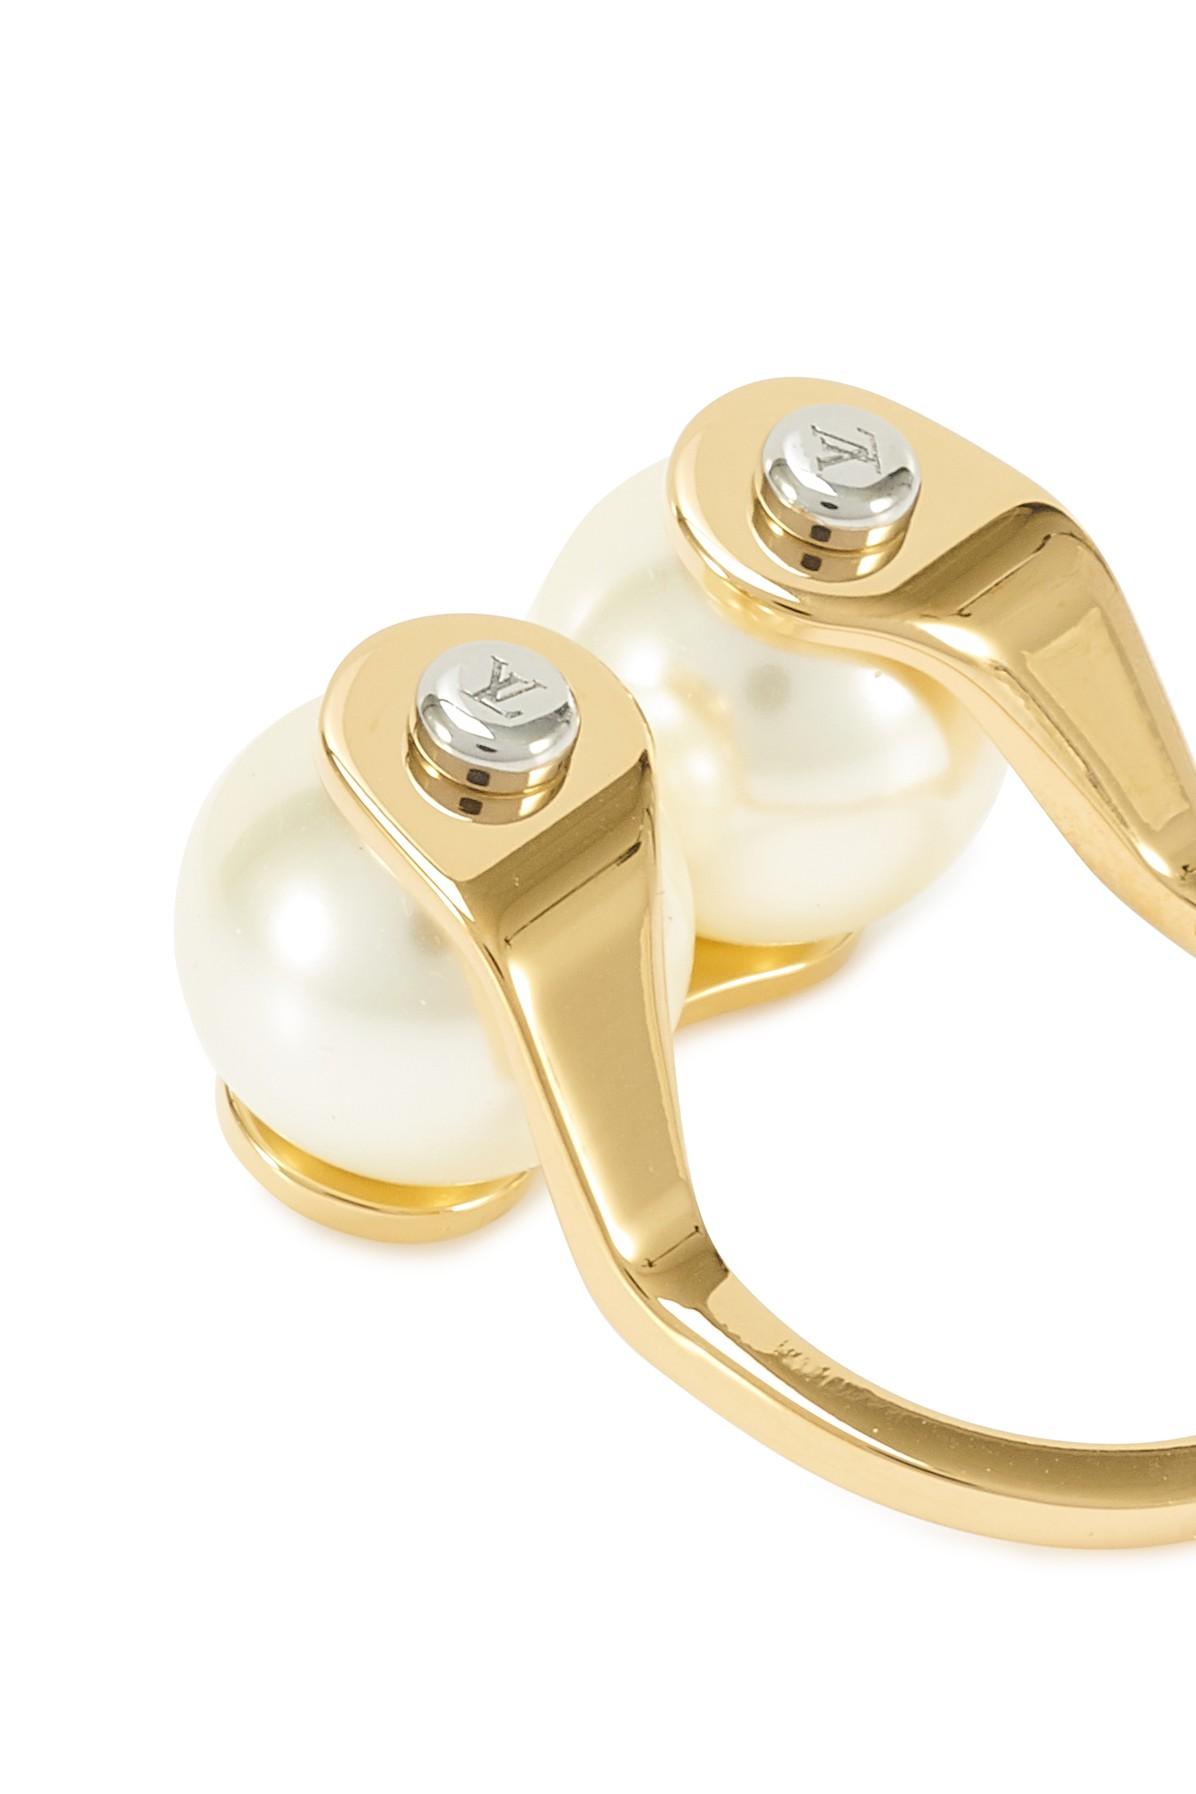 Louis Vuitton LV Eclipse Pearl Ring